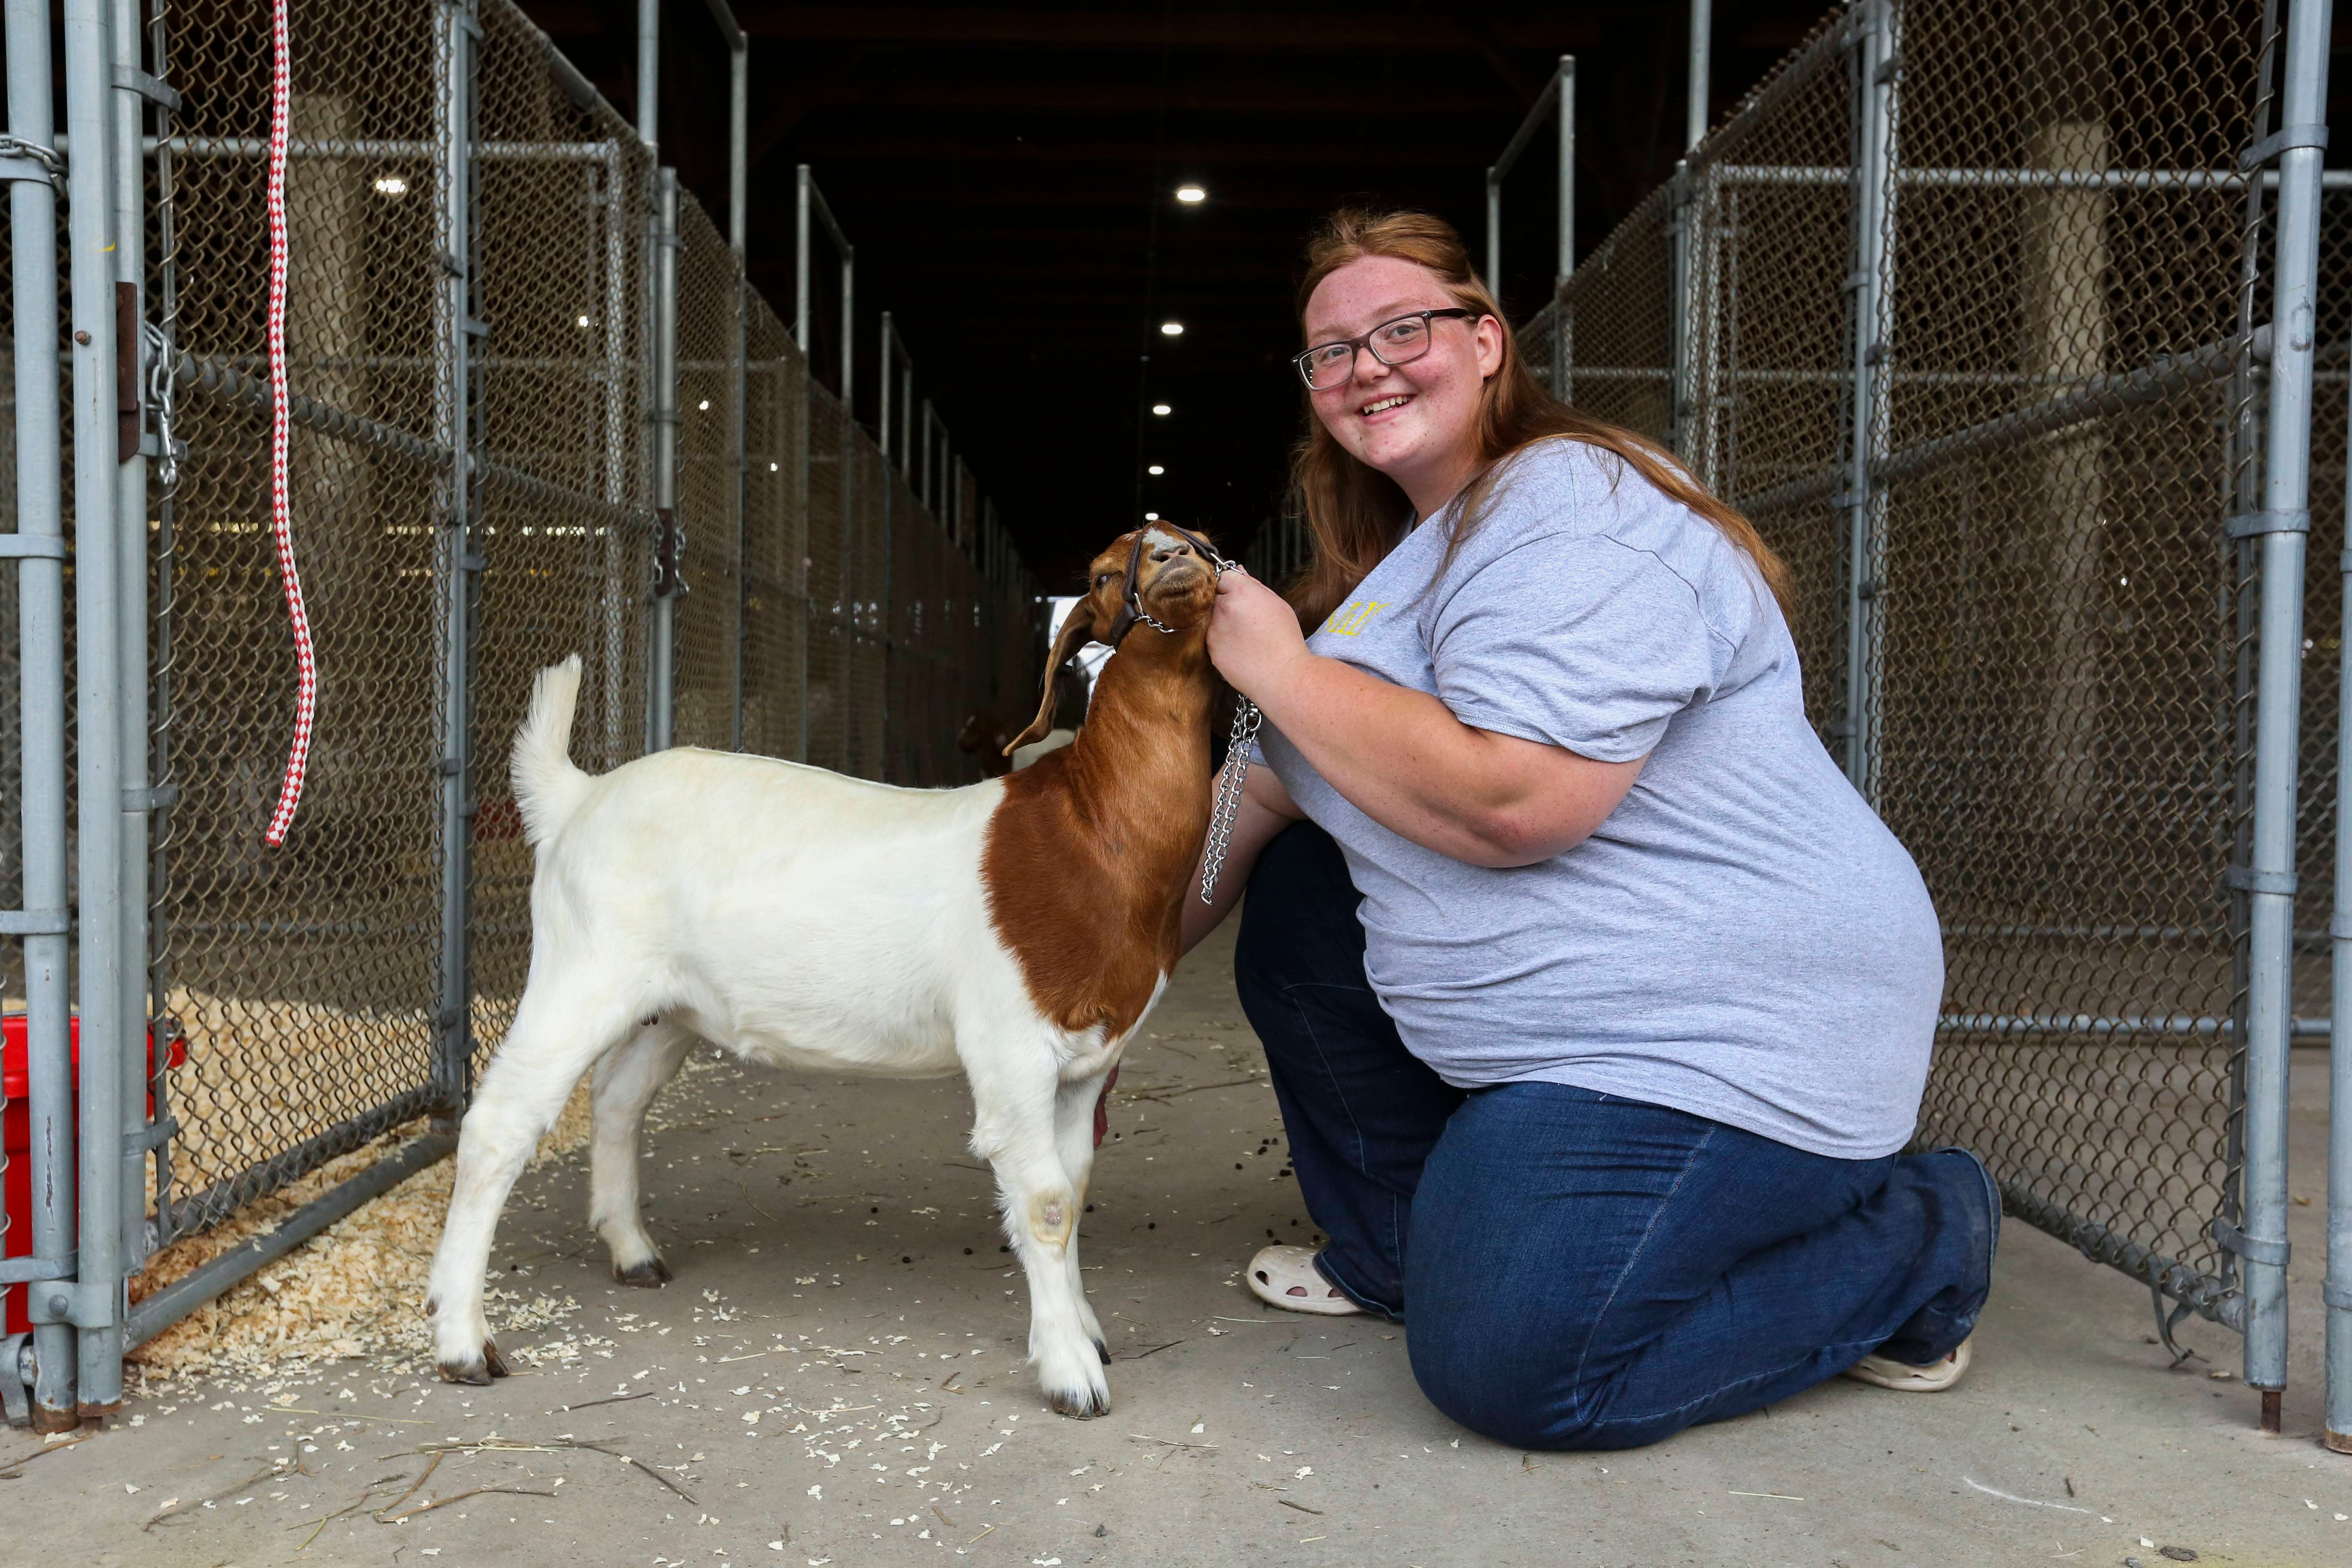 Alivia Blum shows off her goat, Miss Kitty, at the Maryland State Fair in Timonium, MD on August 25, 2022.